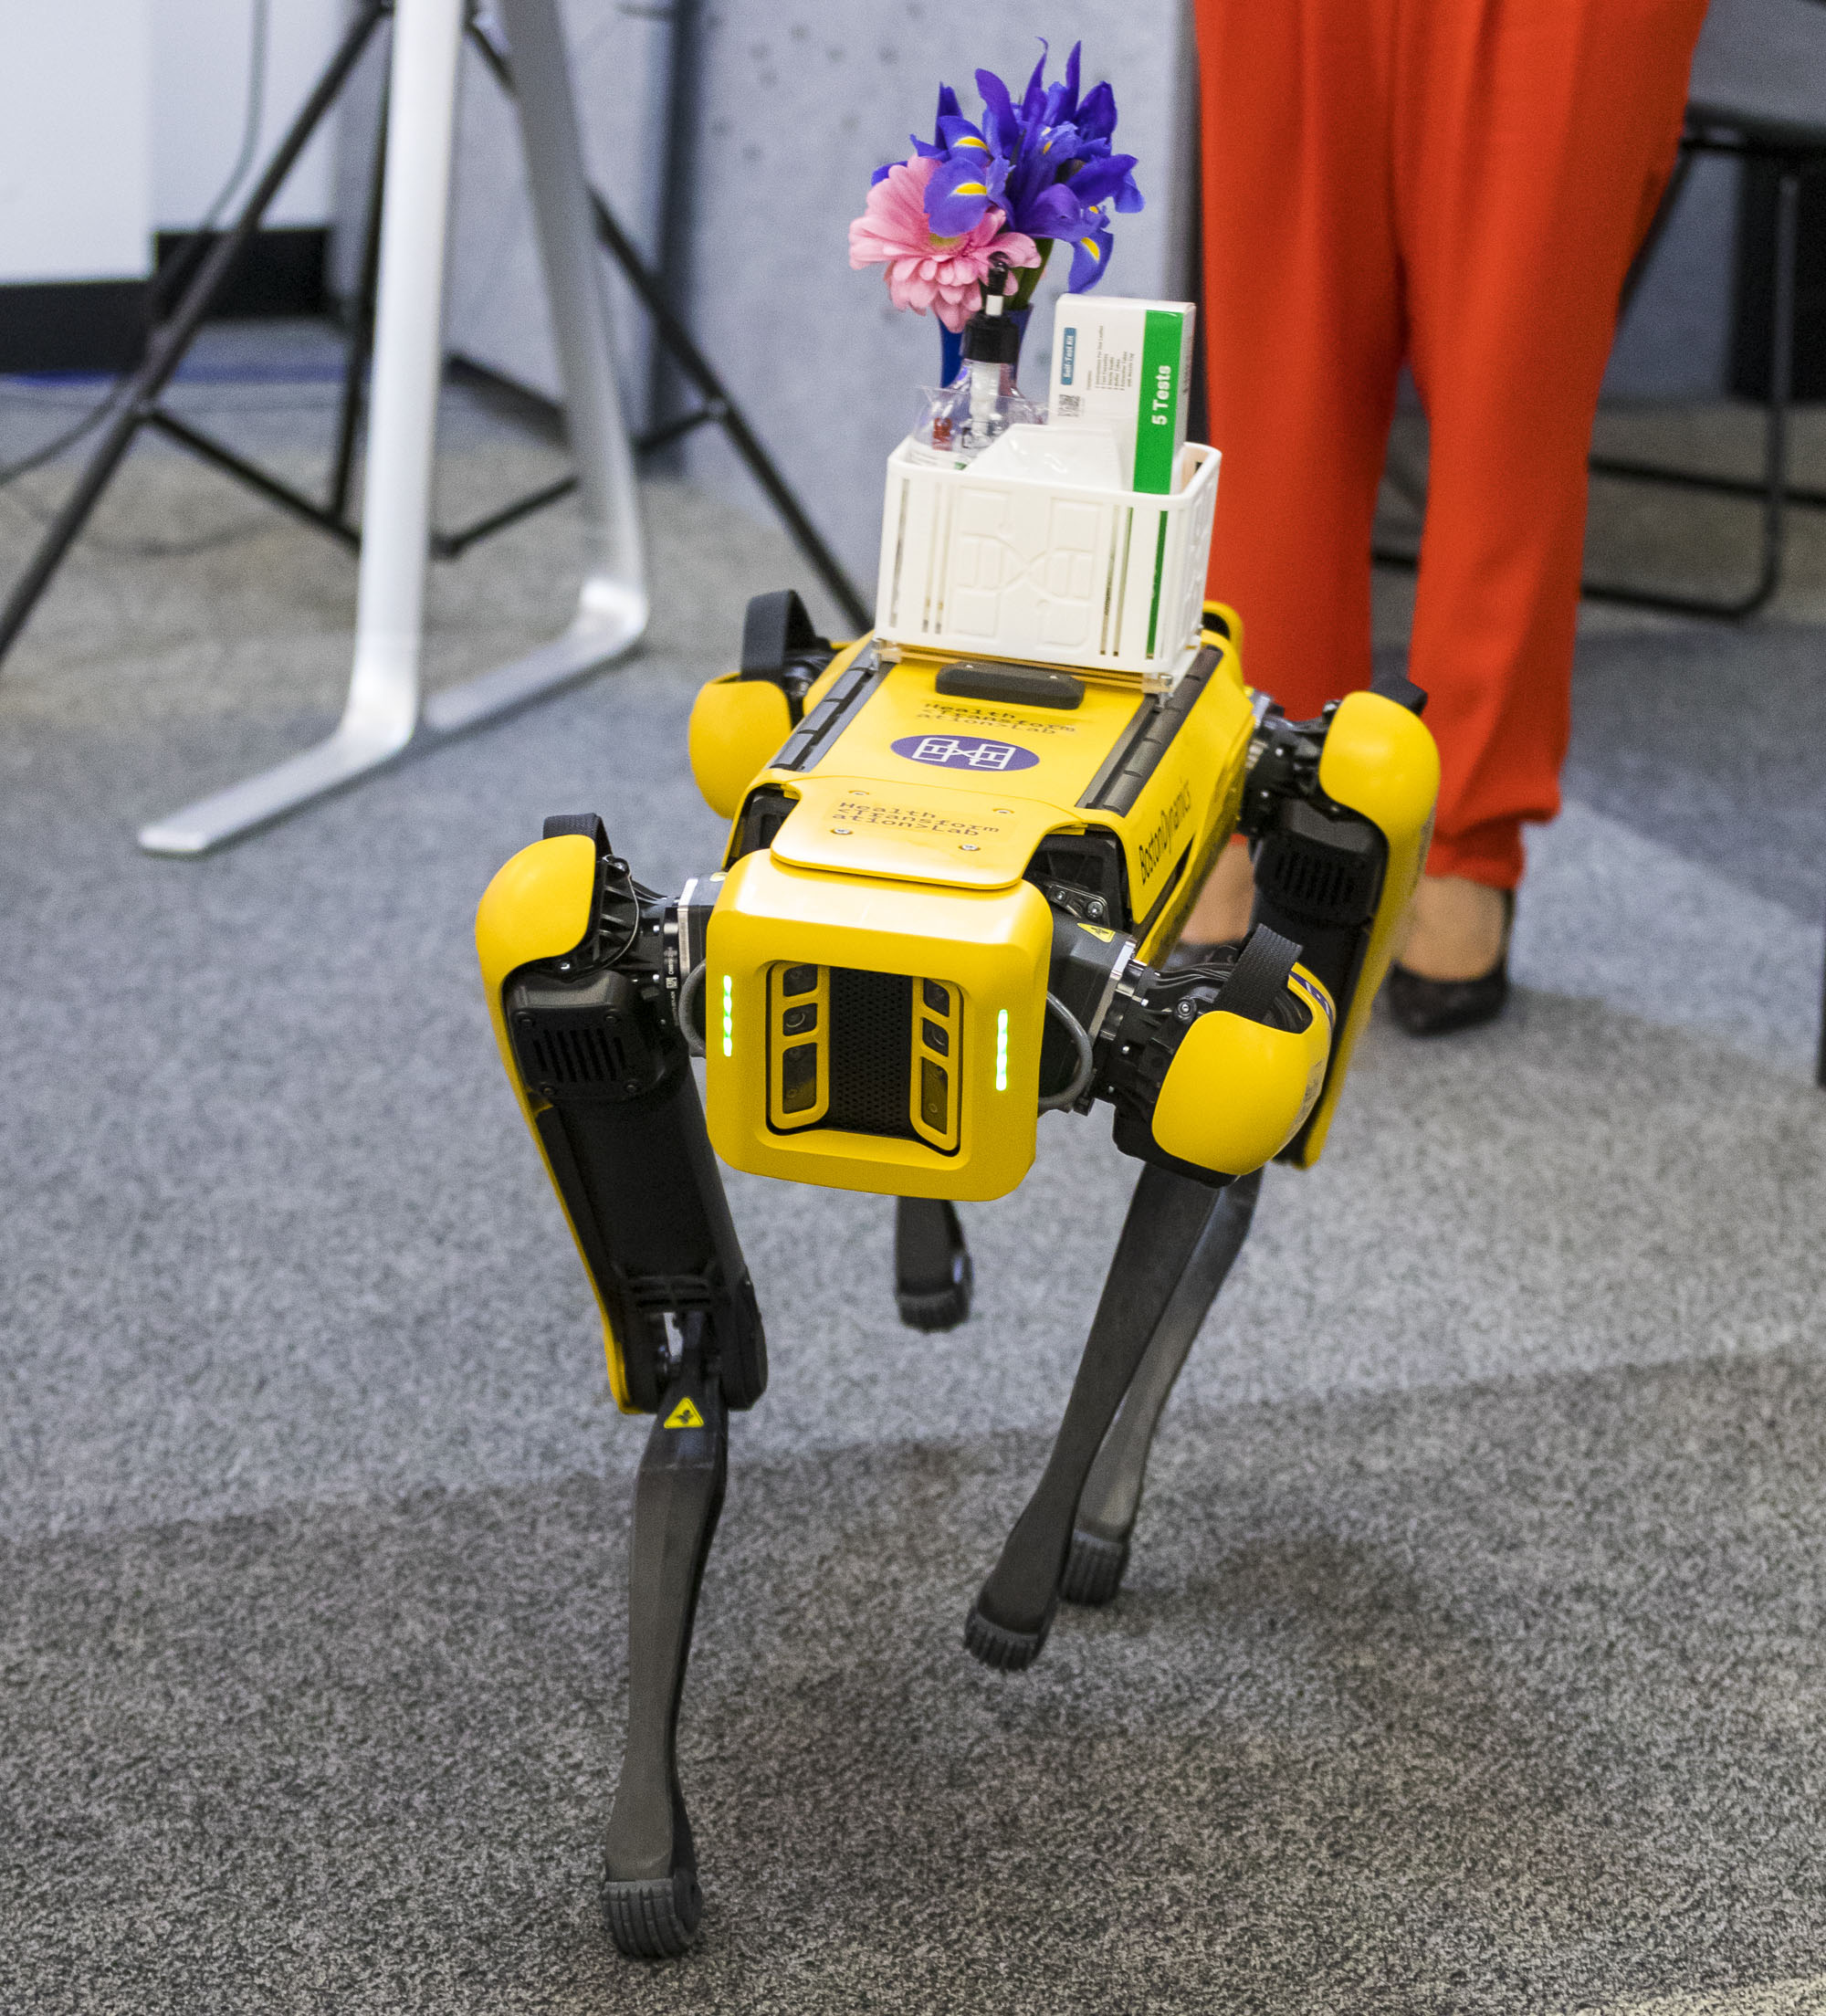 A robotic dog delivers tests and flowers